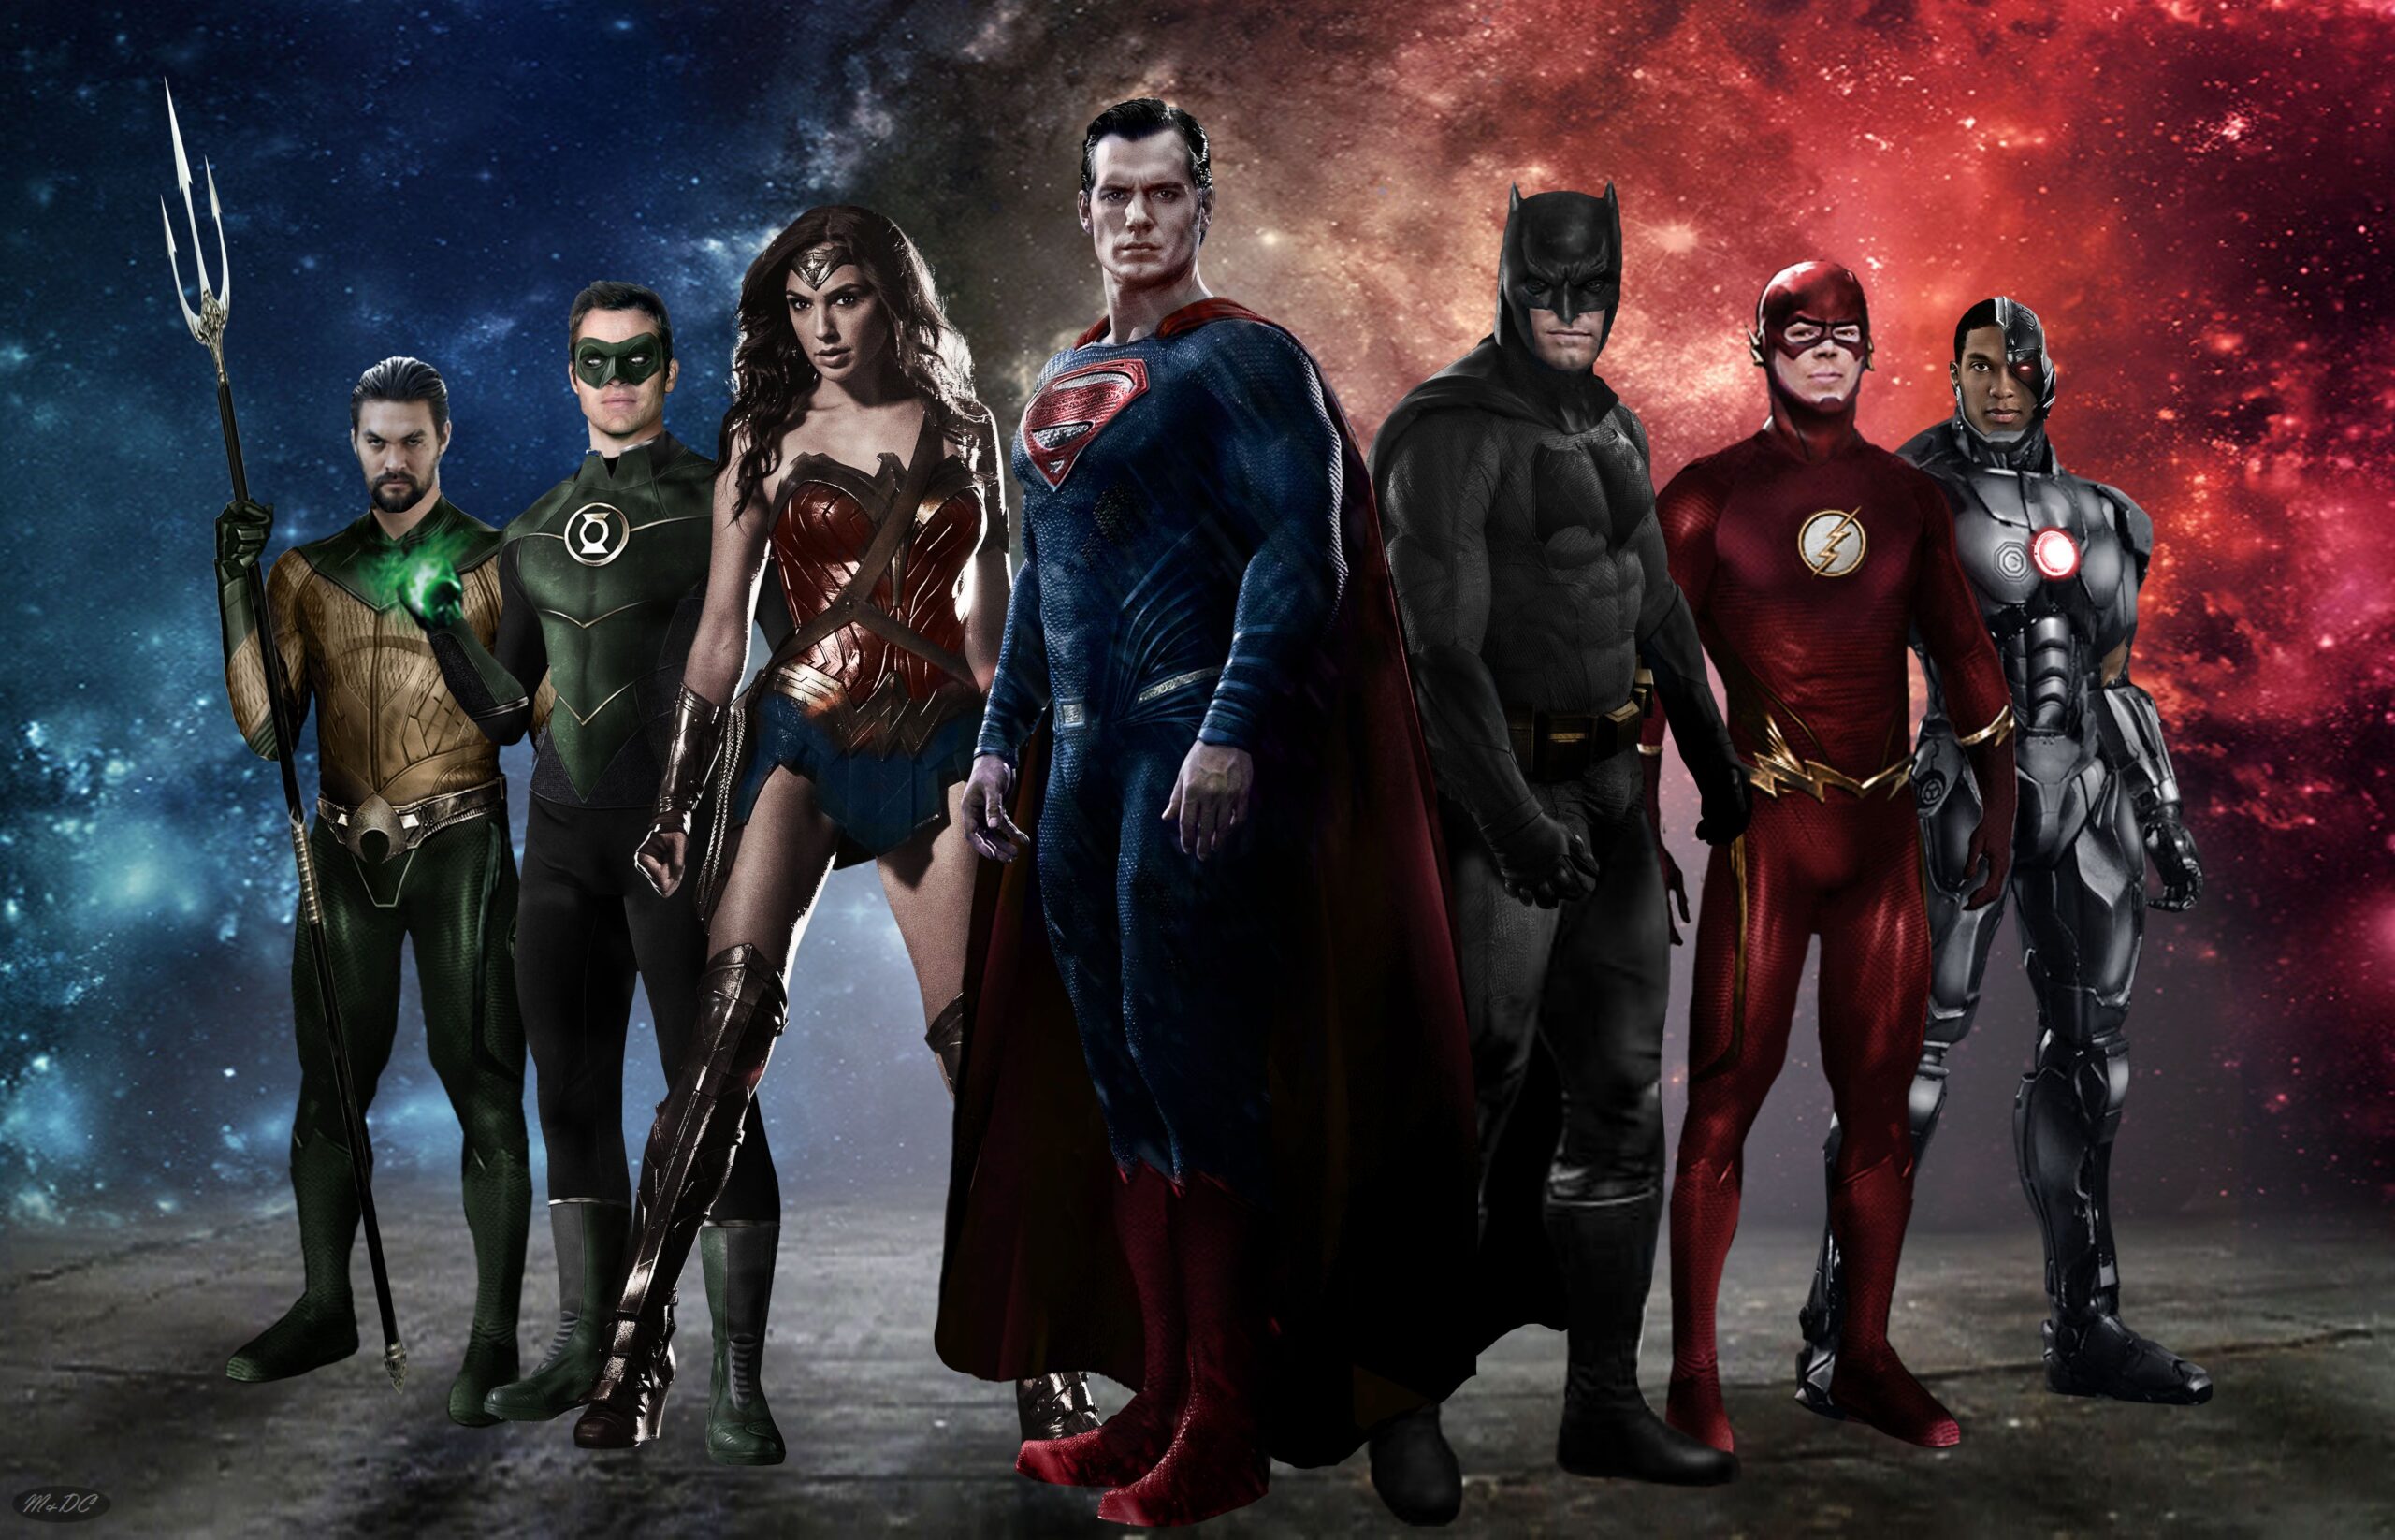 Justice League Movie Wallpapers Free » Cinema Wallpapers p